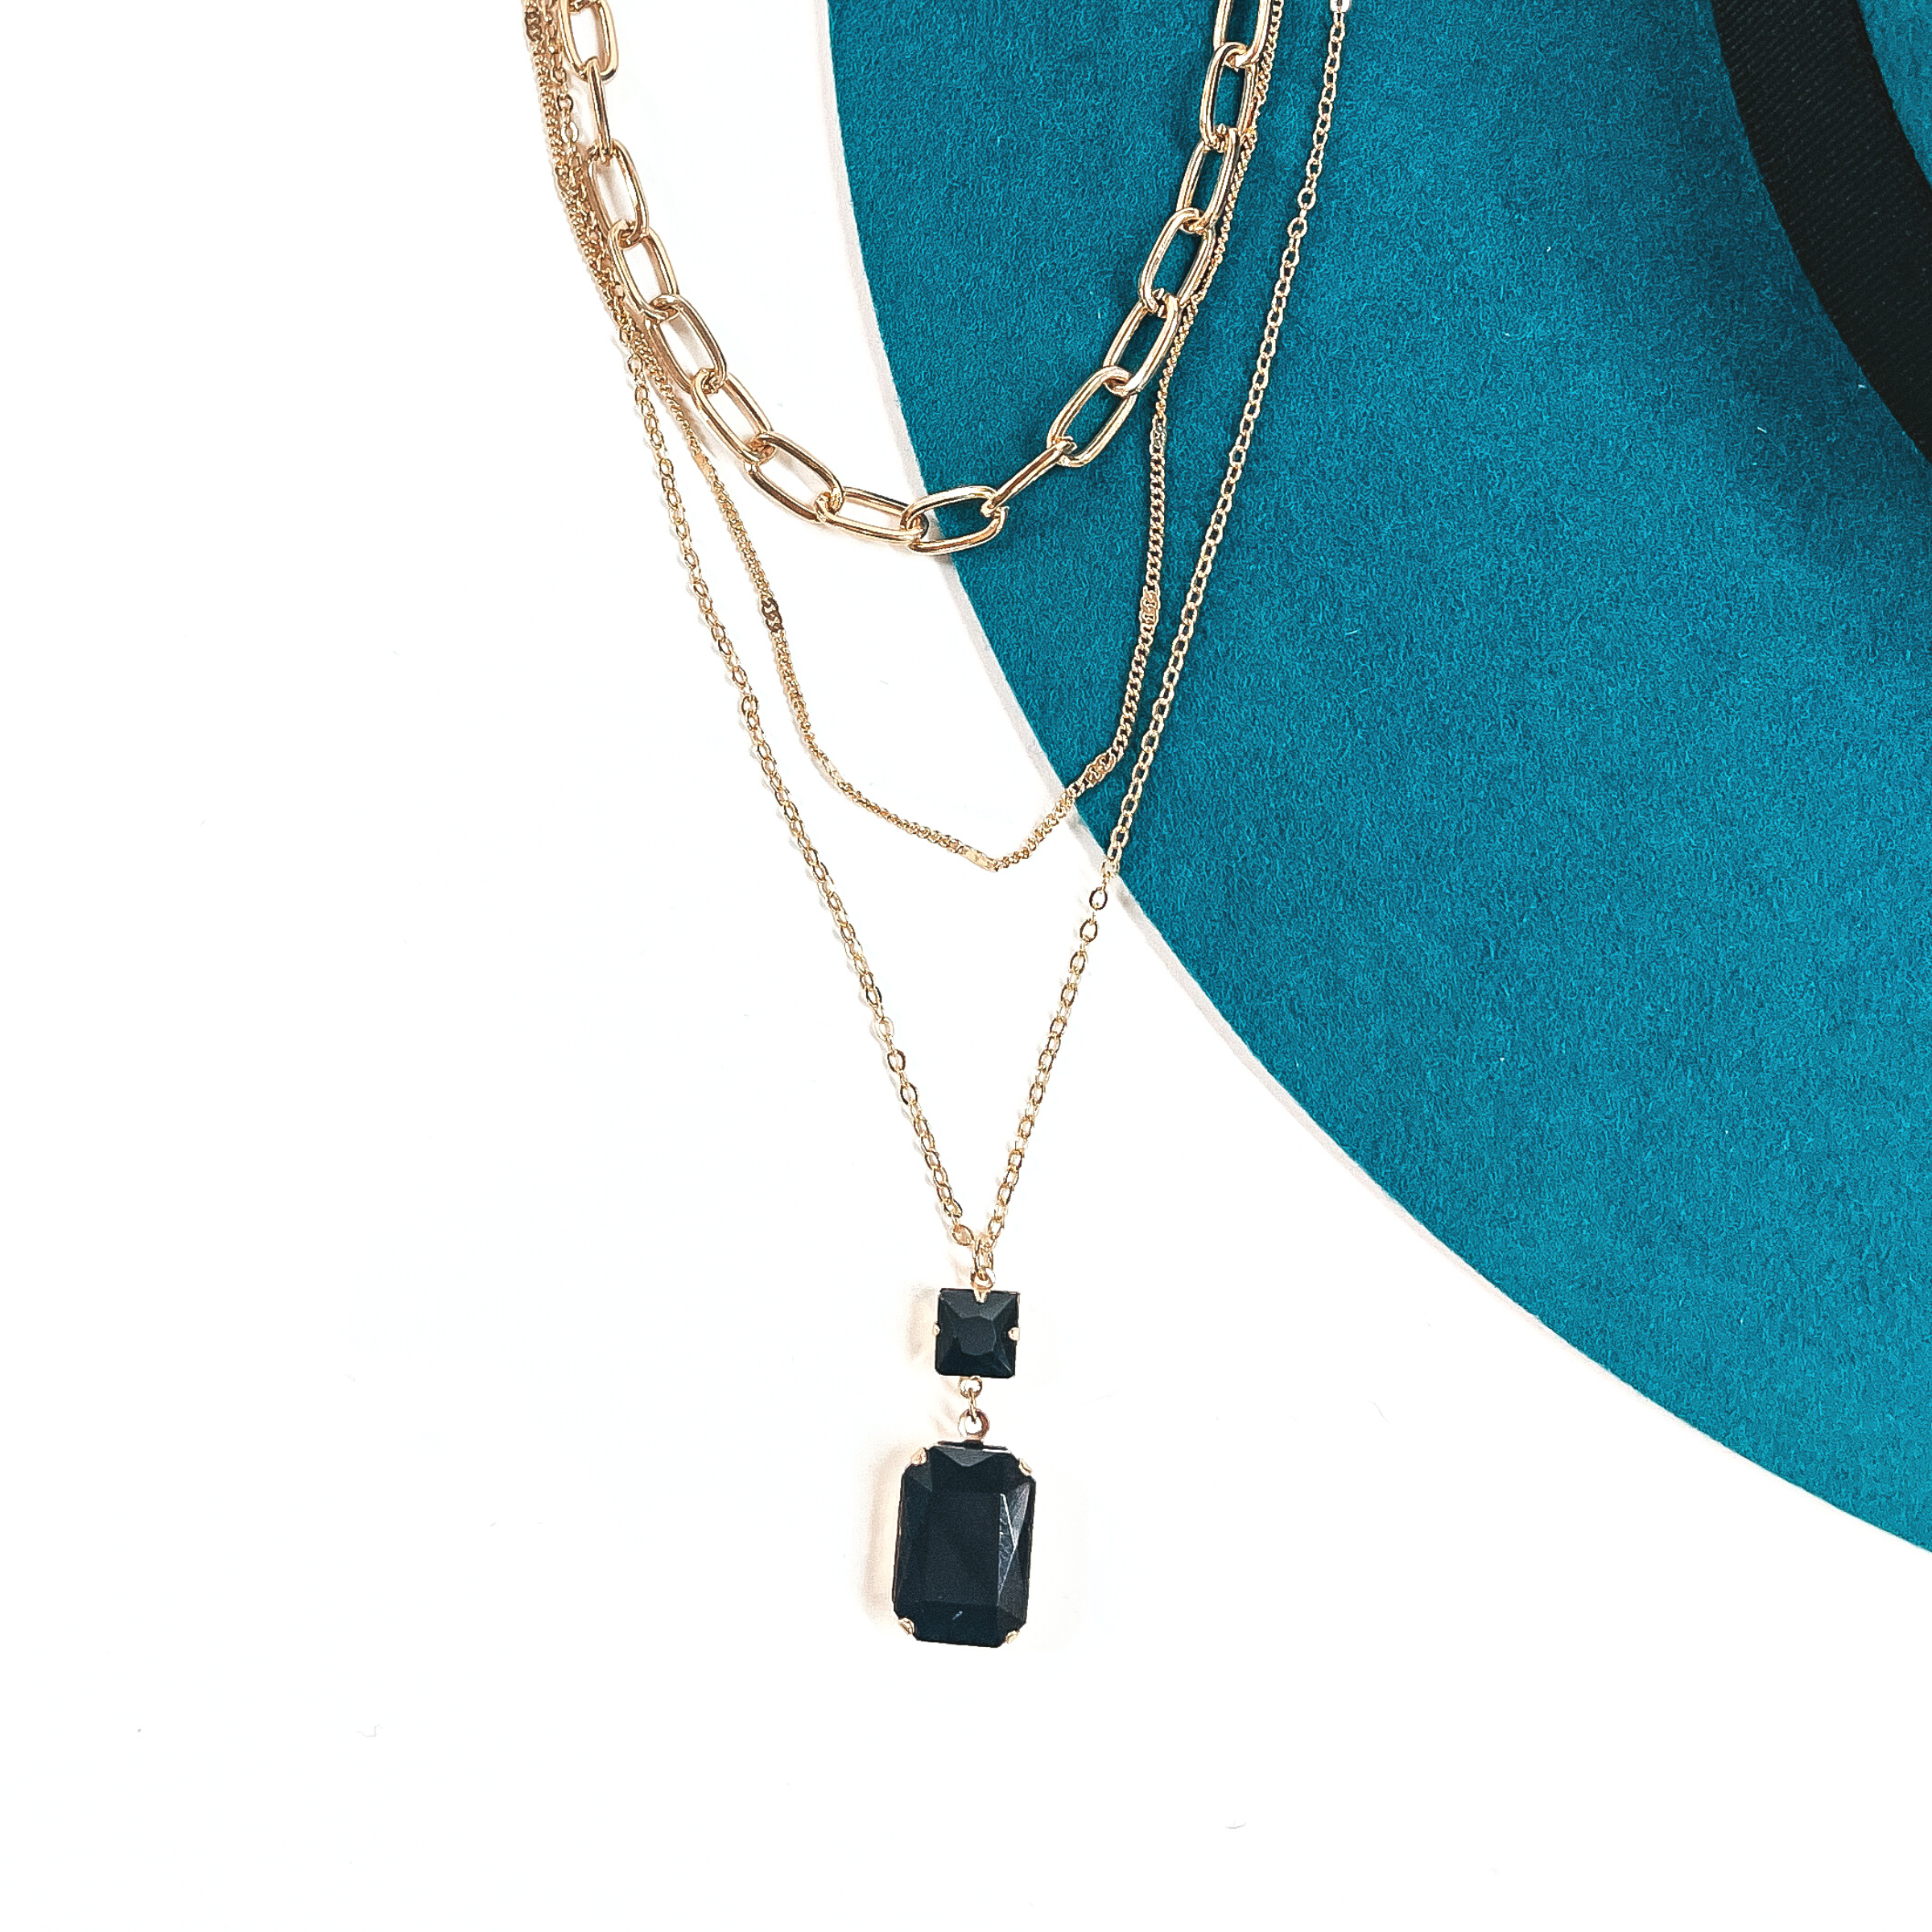 This is a three strand gold tone necklace with a black crystal pendant. There are  two thin strands and one thick chain link strand. The longest strand has a small  square black crystal connector and a rectangle black crystal. This necklace is taken  on a teal felt hat brim and on a white background.